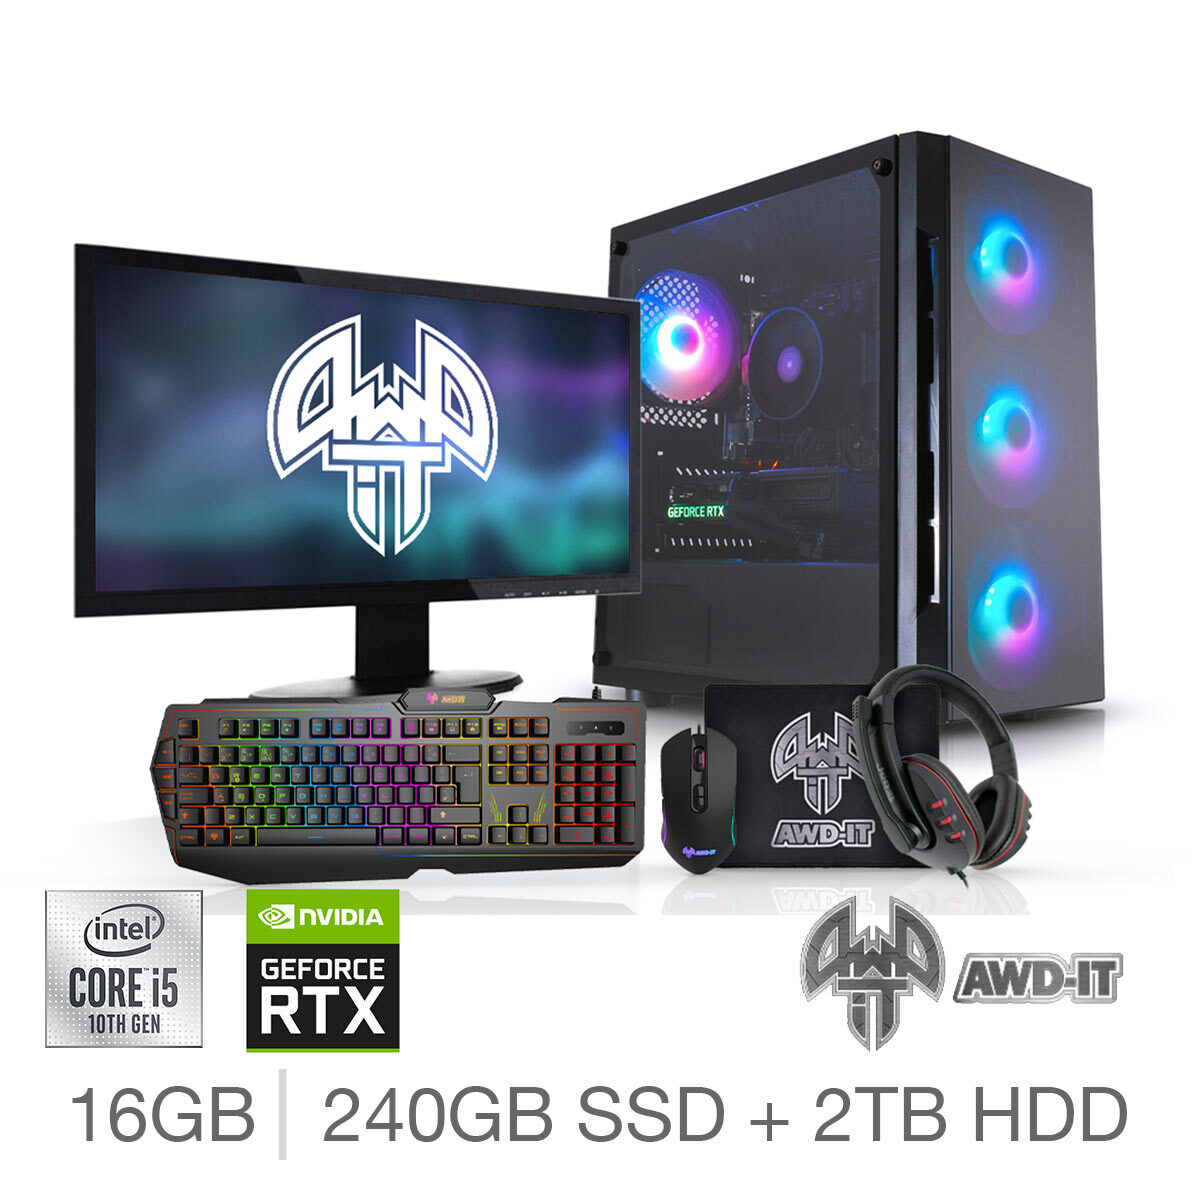 Buy AWD-IT Hero 6, Intel Core i5, 16GB RAM, 240GB SSD, 2TB HDD, NVIDIA GeForce RTX 3060, Gaming Desktop PC with 24” Full HD Widescreen Monitor, RGB Gaming Keyboard & Mouse Plus Headset & Mouse Pad at costco.co.uk